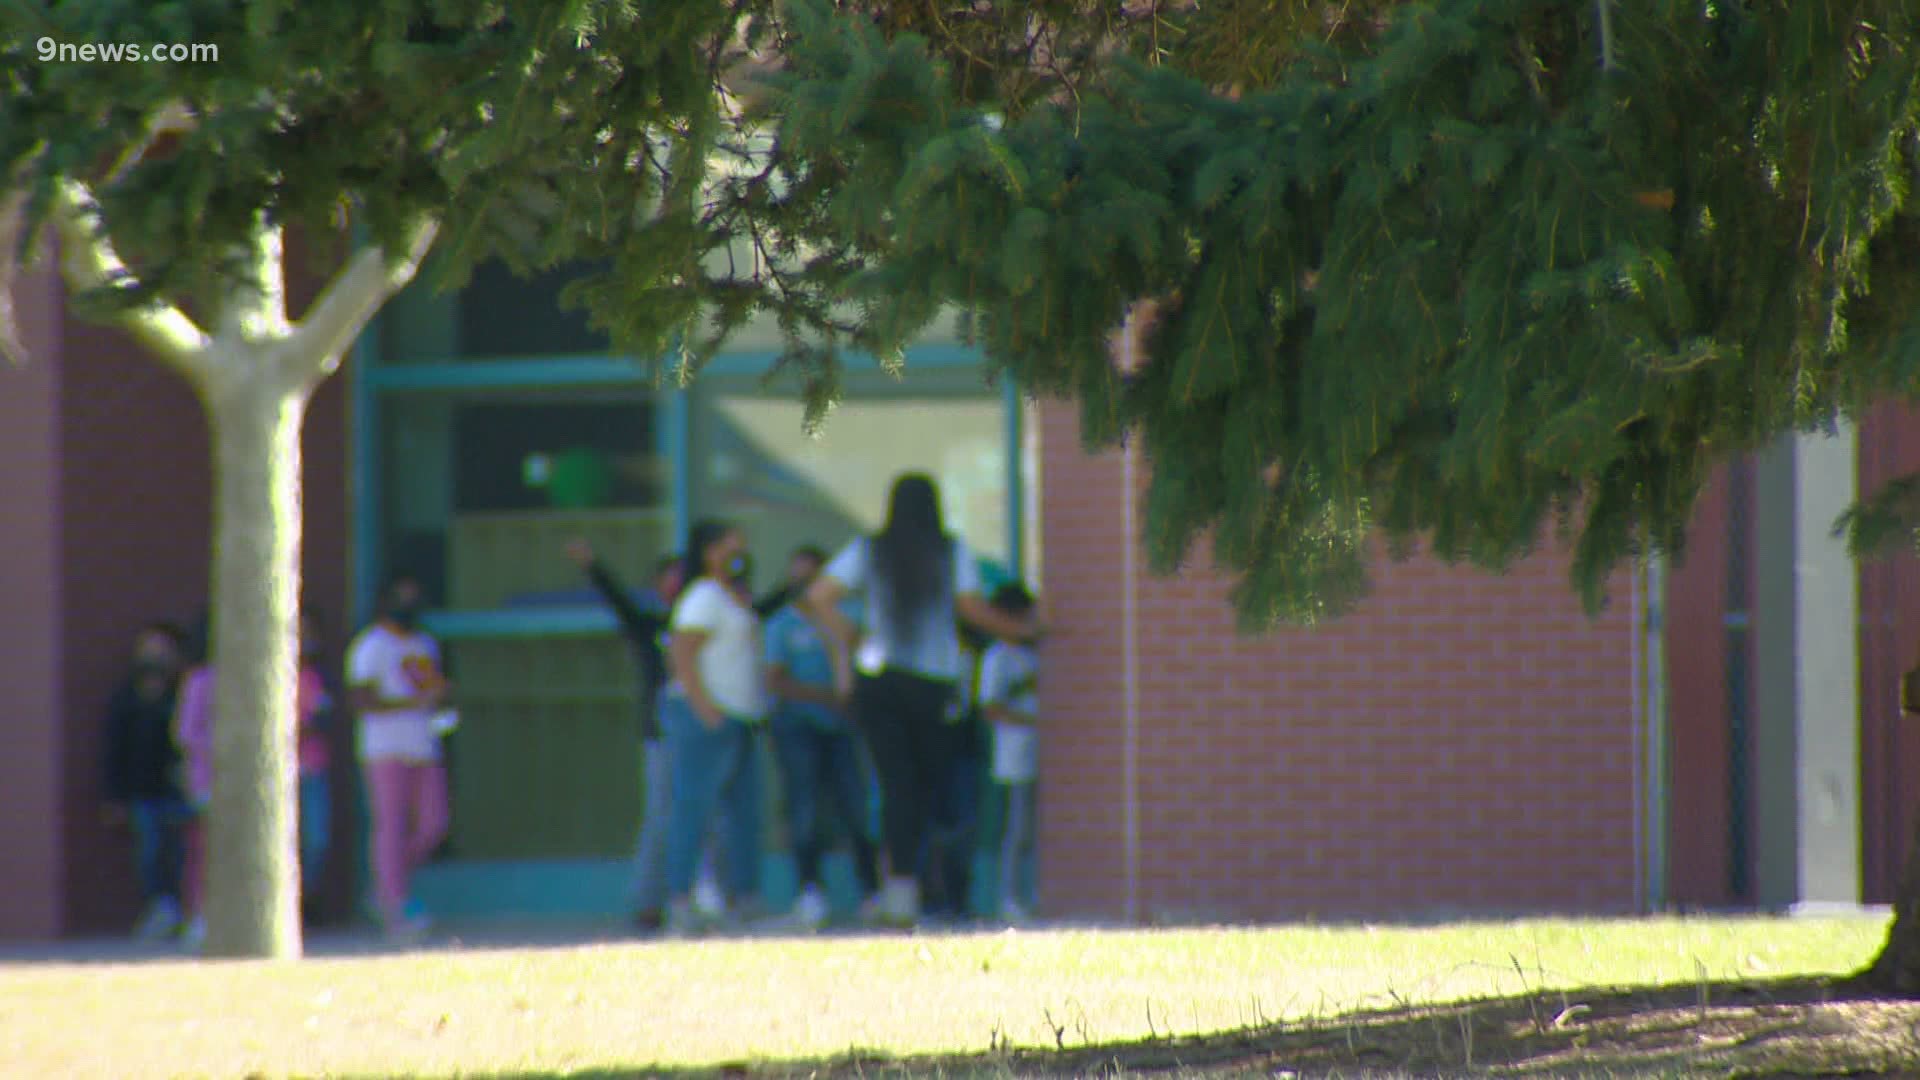 Residents in Denver voted to increase property tax and accolate the money towards schools.